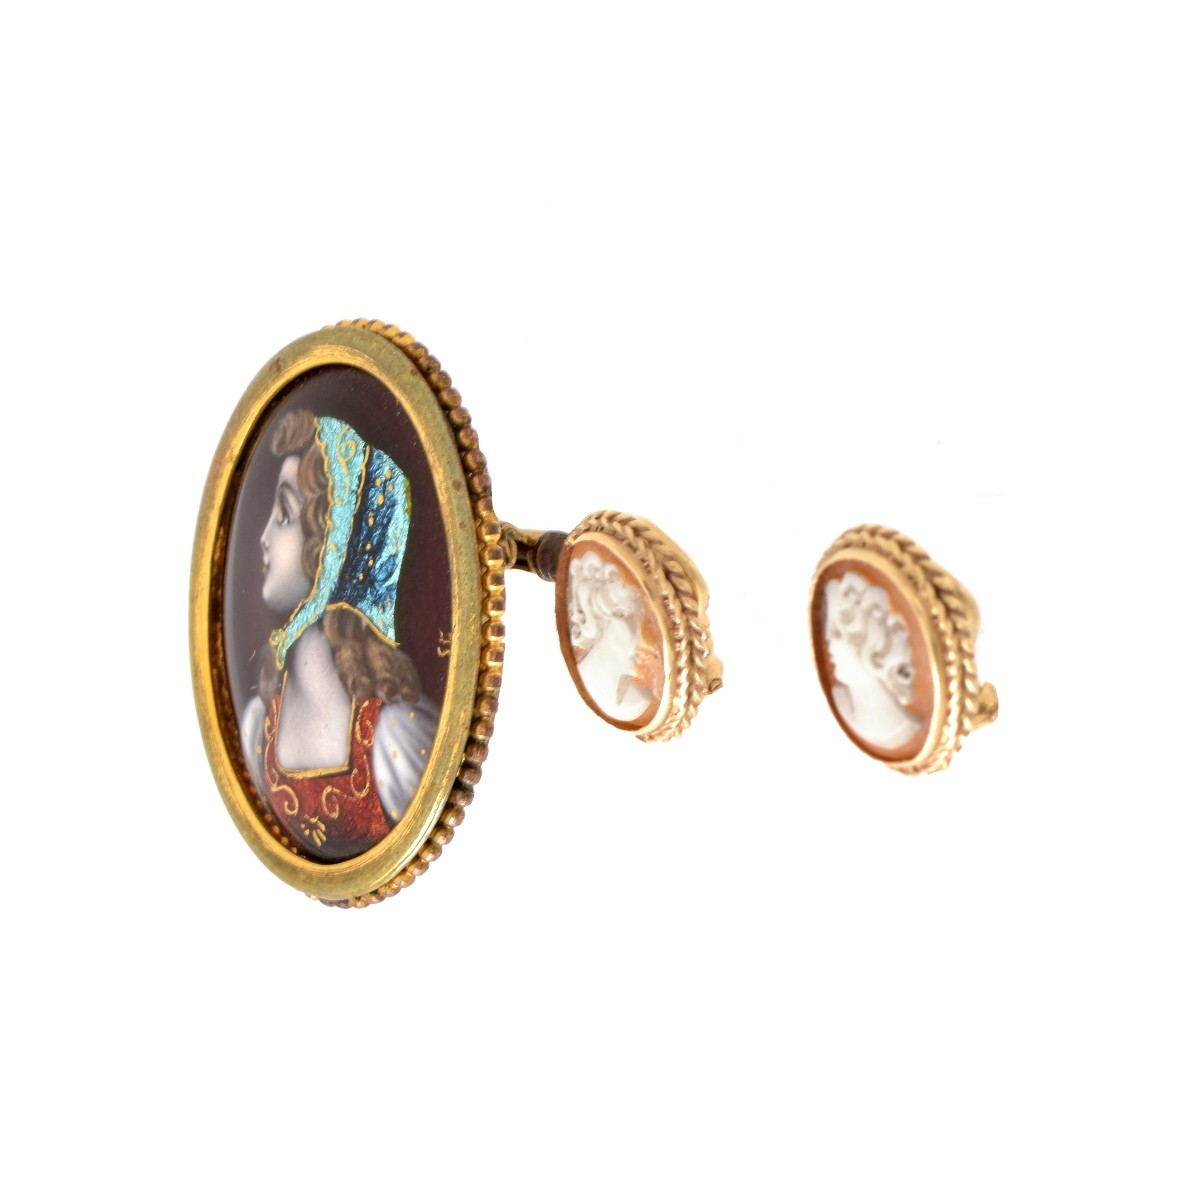 Antique Portrait Brooch and Cameo Earrings